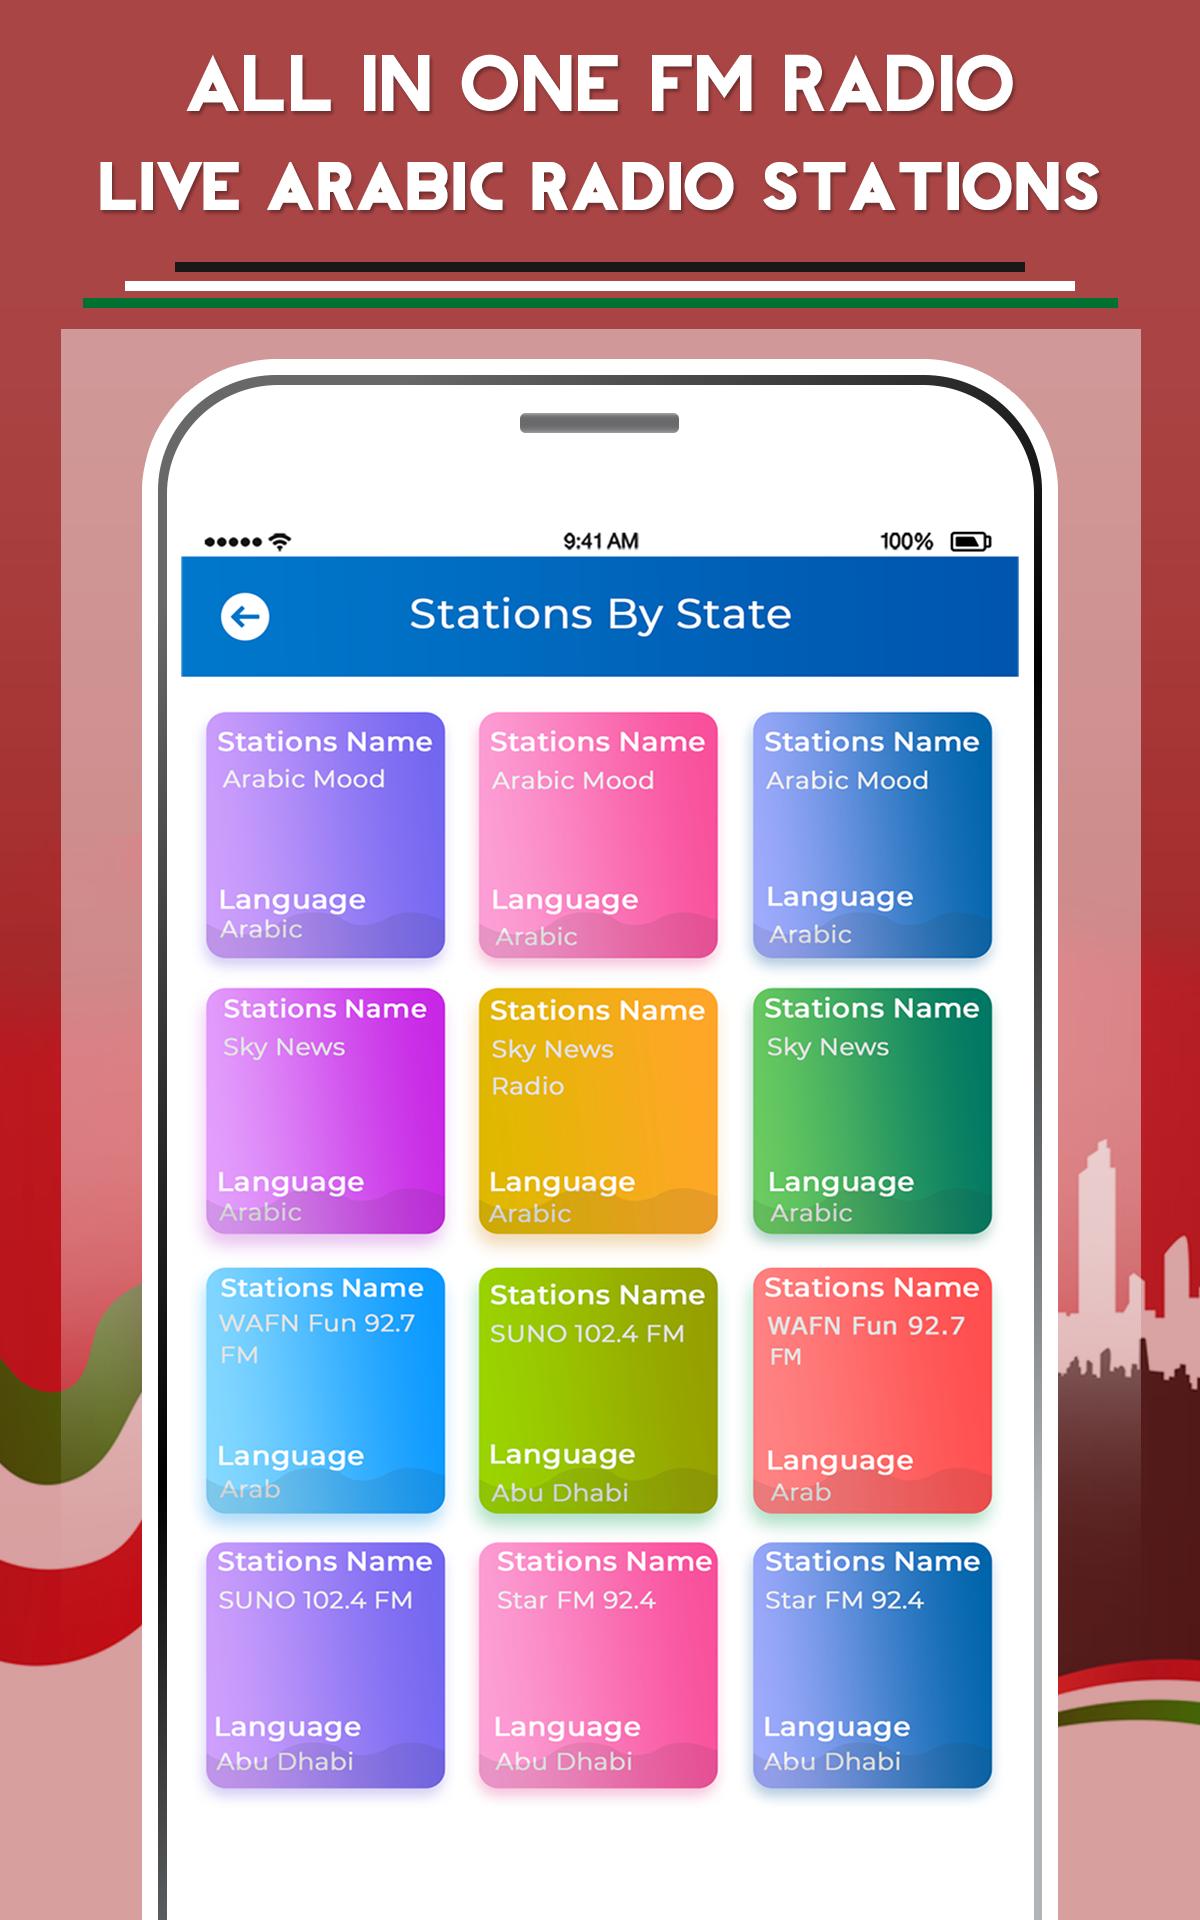 All in One FM Radio - Live Arabic Radio Stations for Android - APK Download